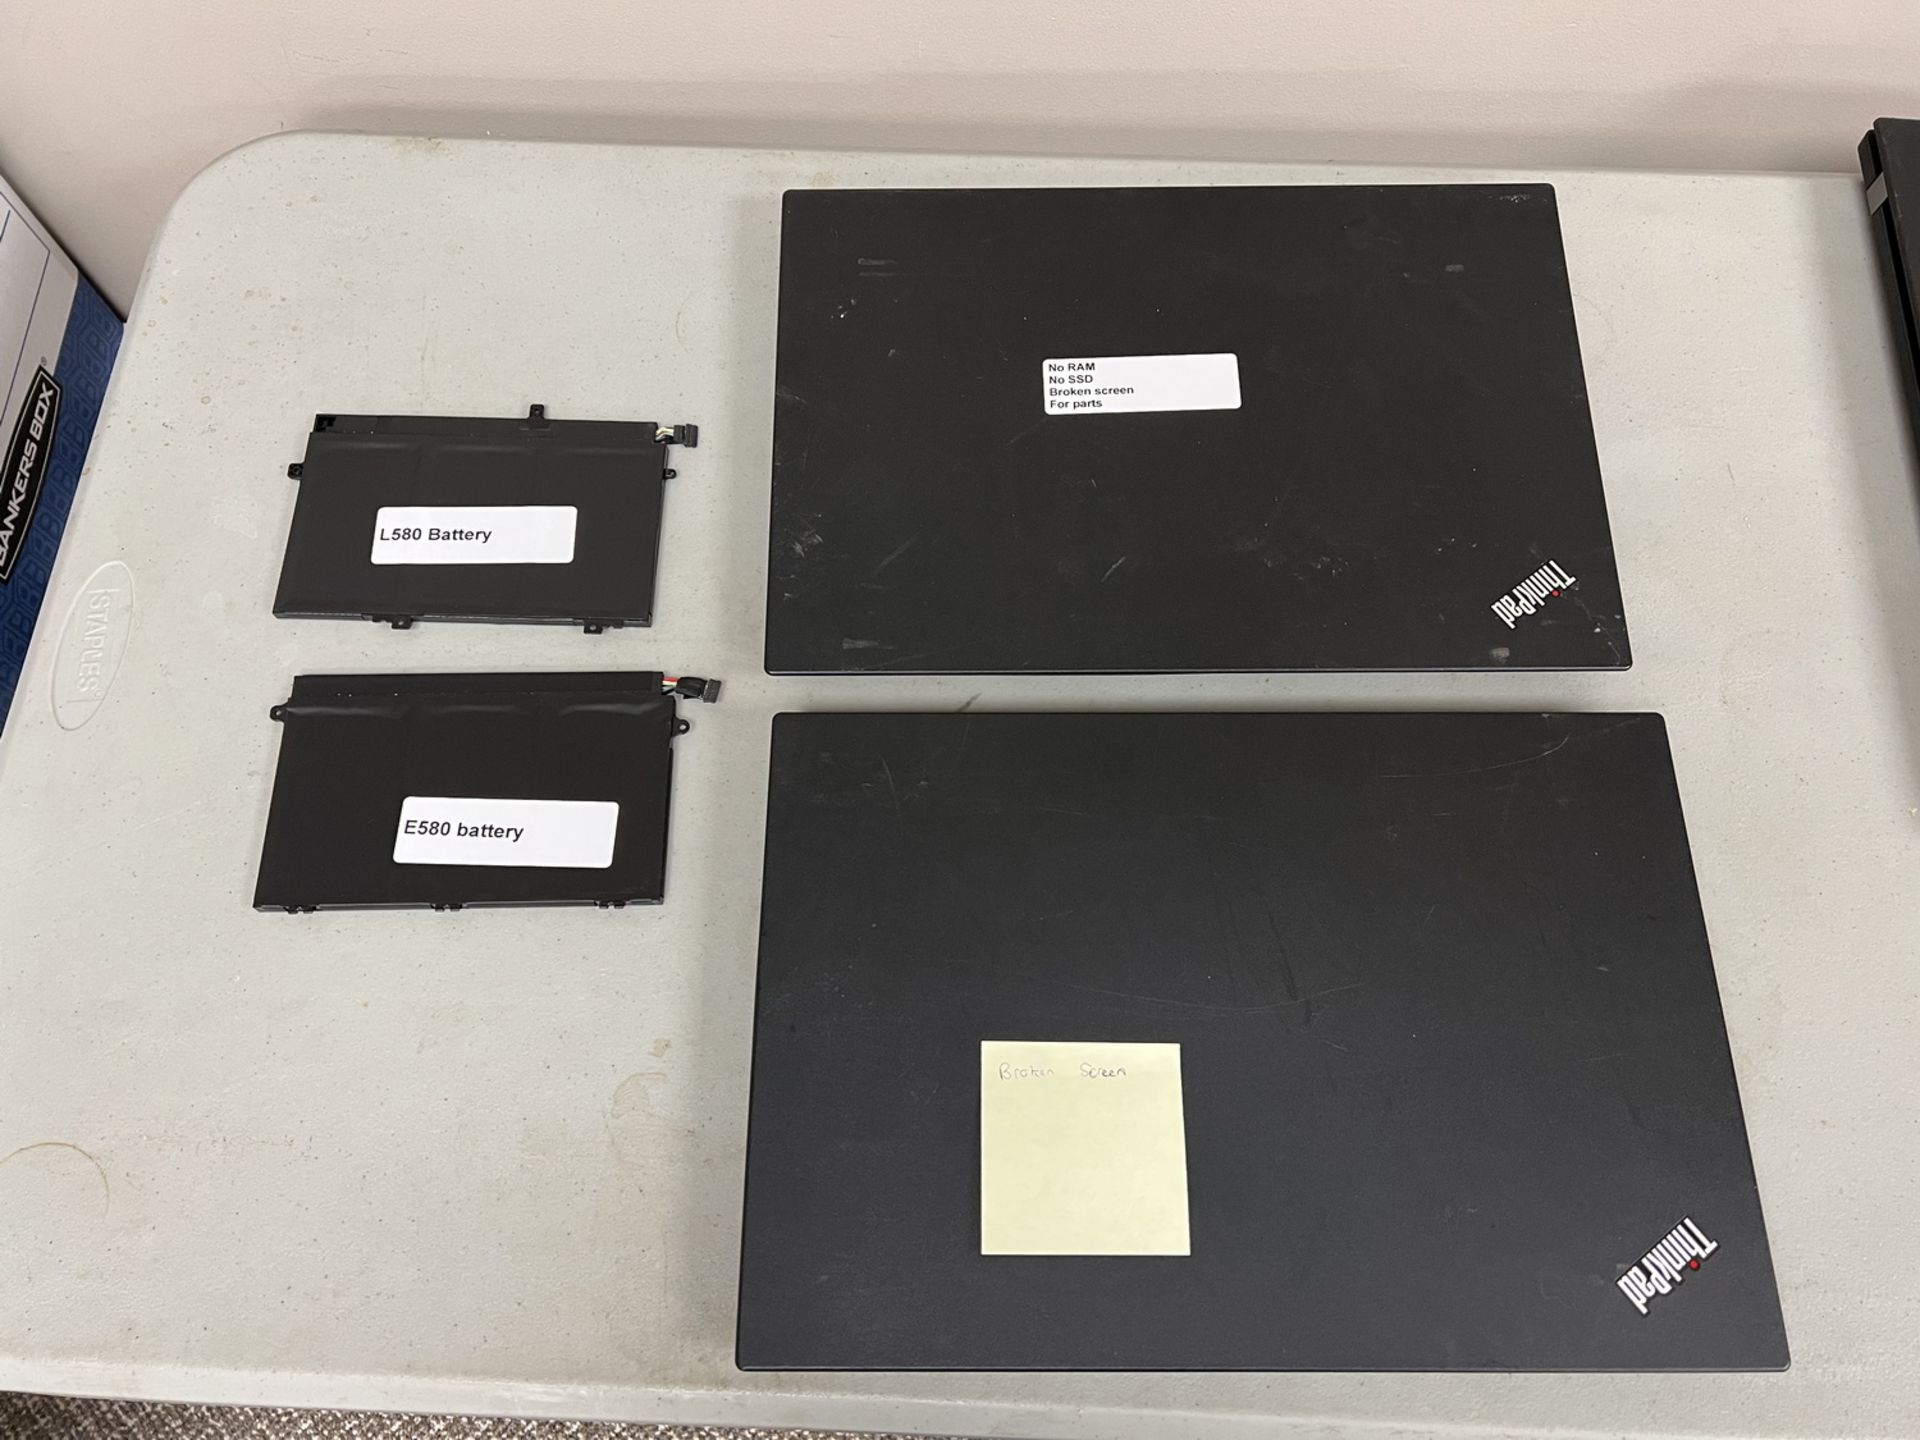 LOT - LAPTOP PARTS C/O (2) LENOVO THINKPAD L580 LAPTOPS (AS IS) AND L580 & E580 BATTERIES